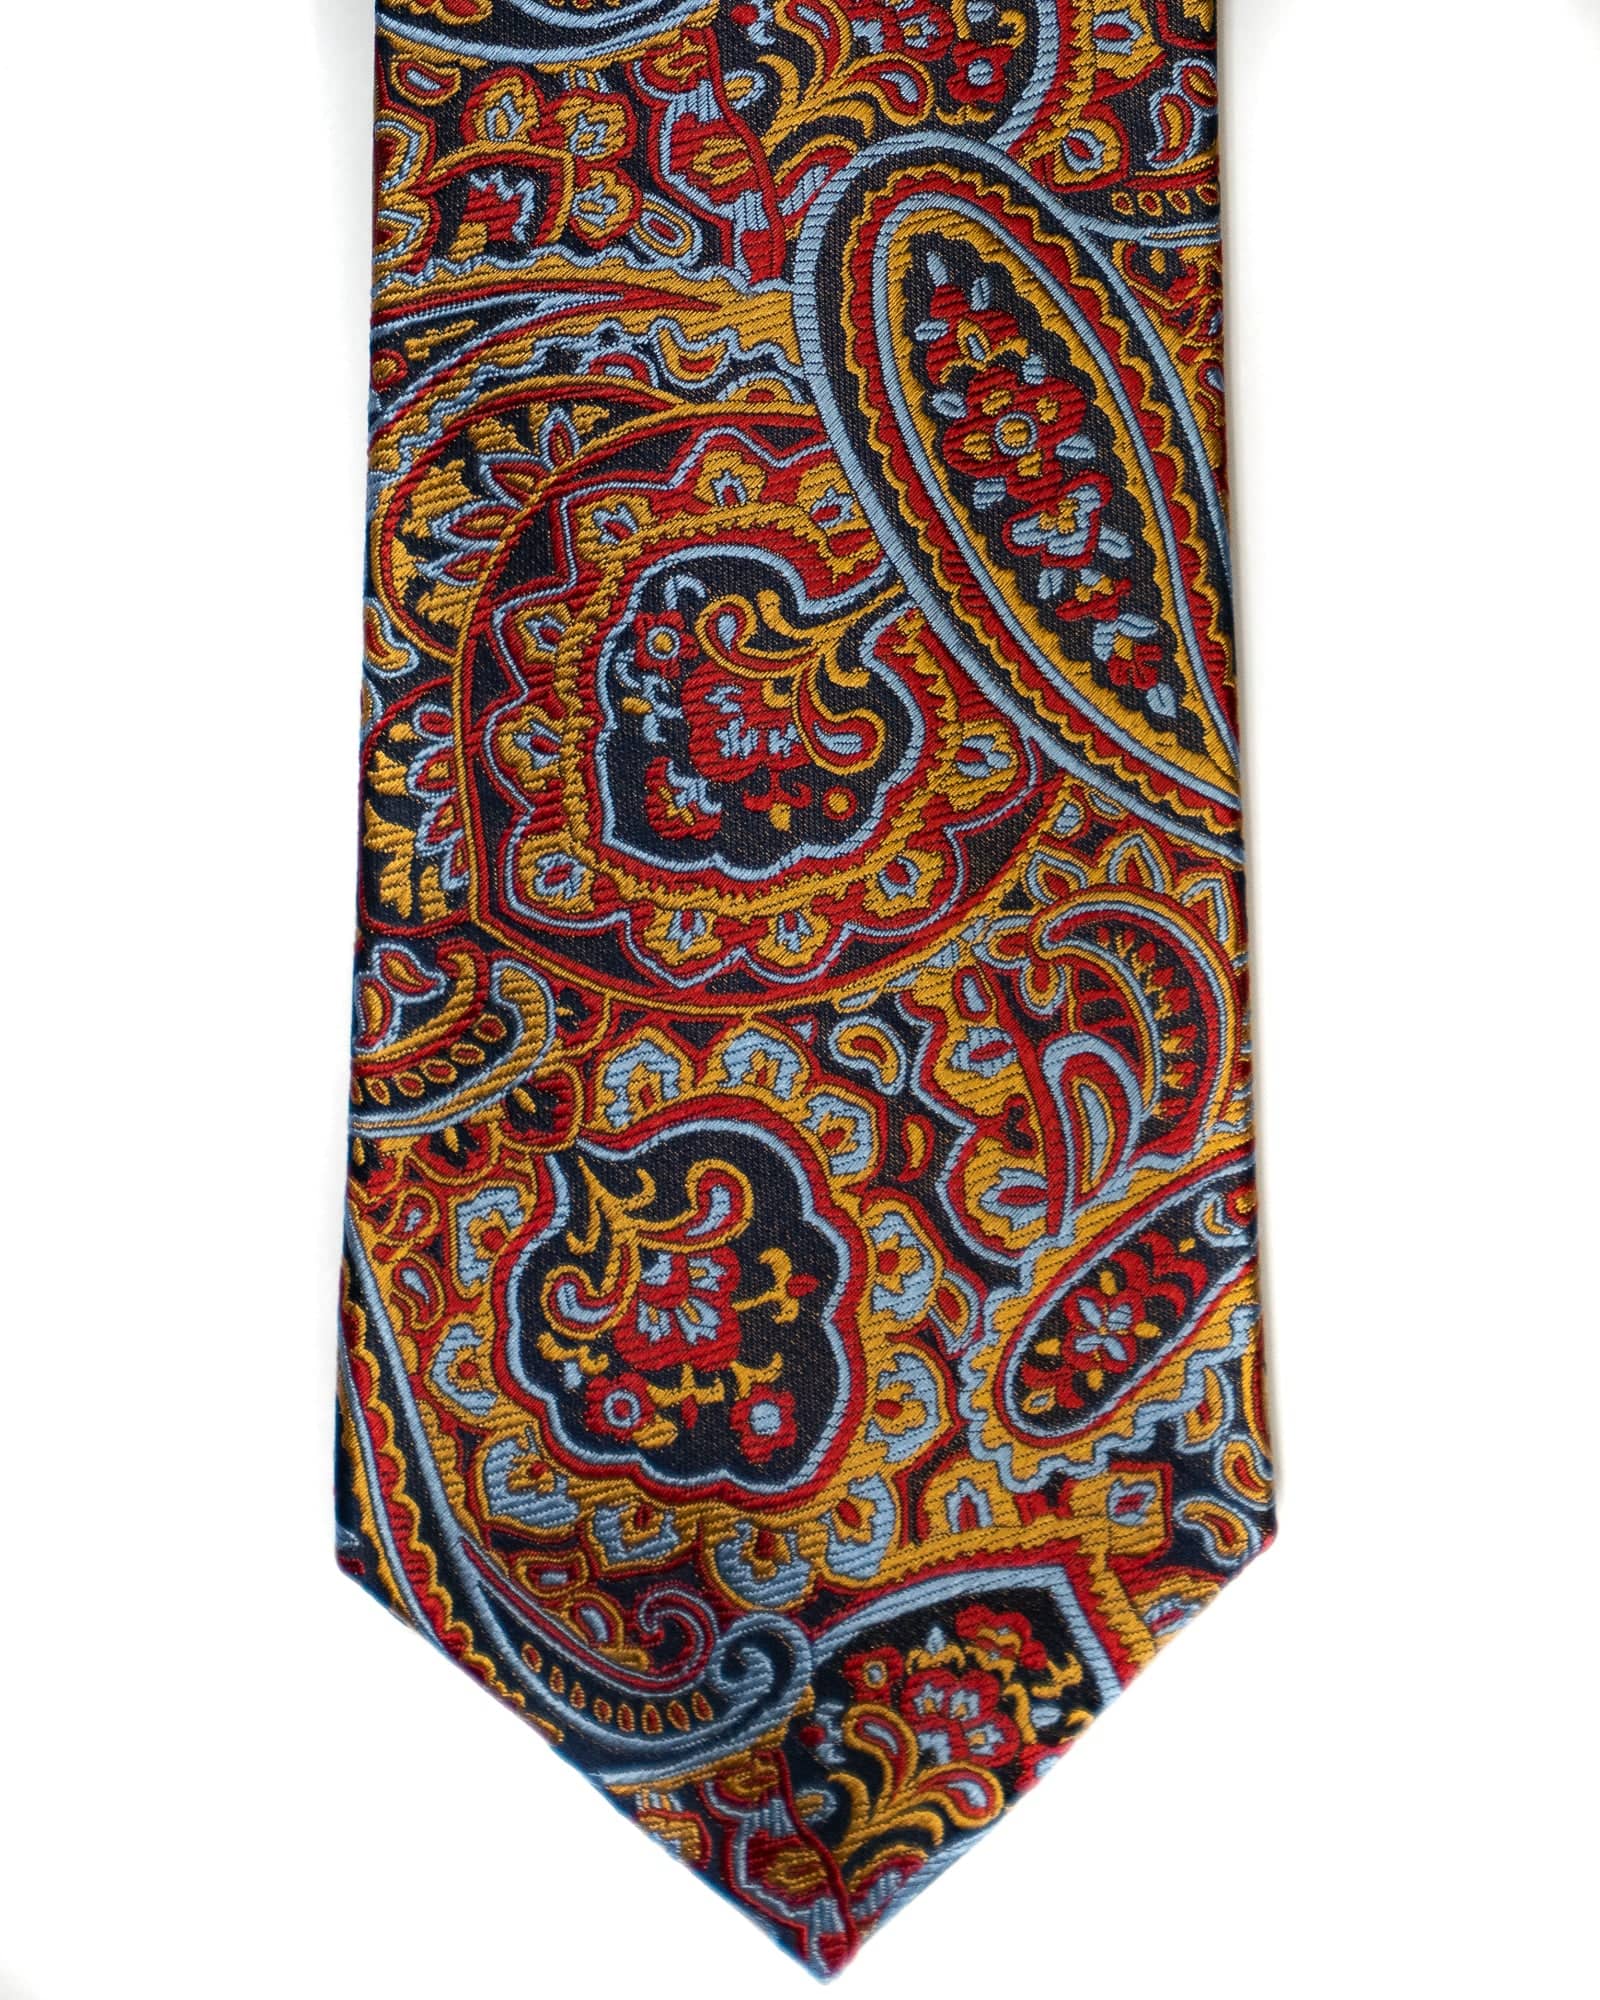 Paisley Silk Tie in Burgundy With Navy & Gold - Rainwater's Men's Clothing and Tuxedo Rental